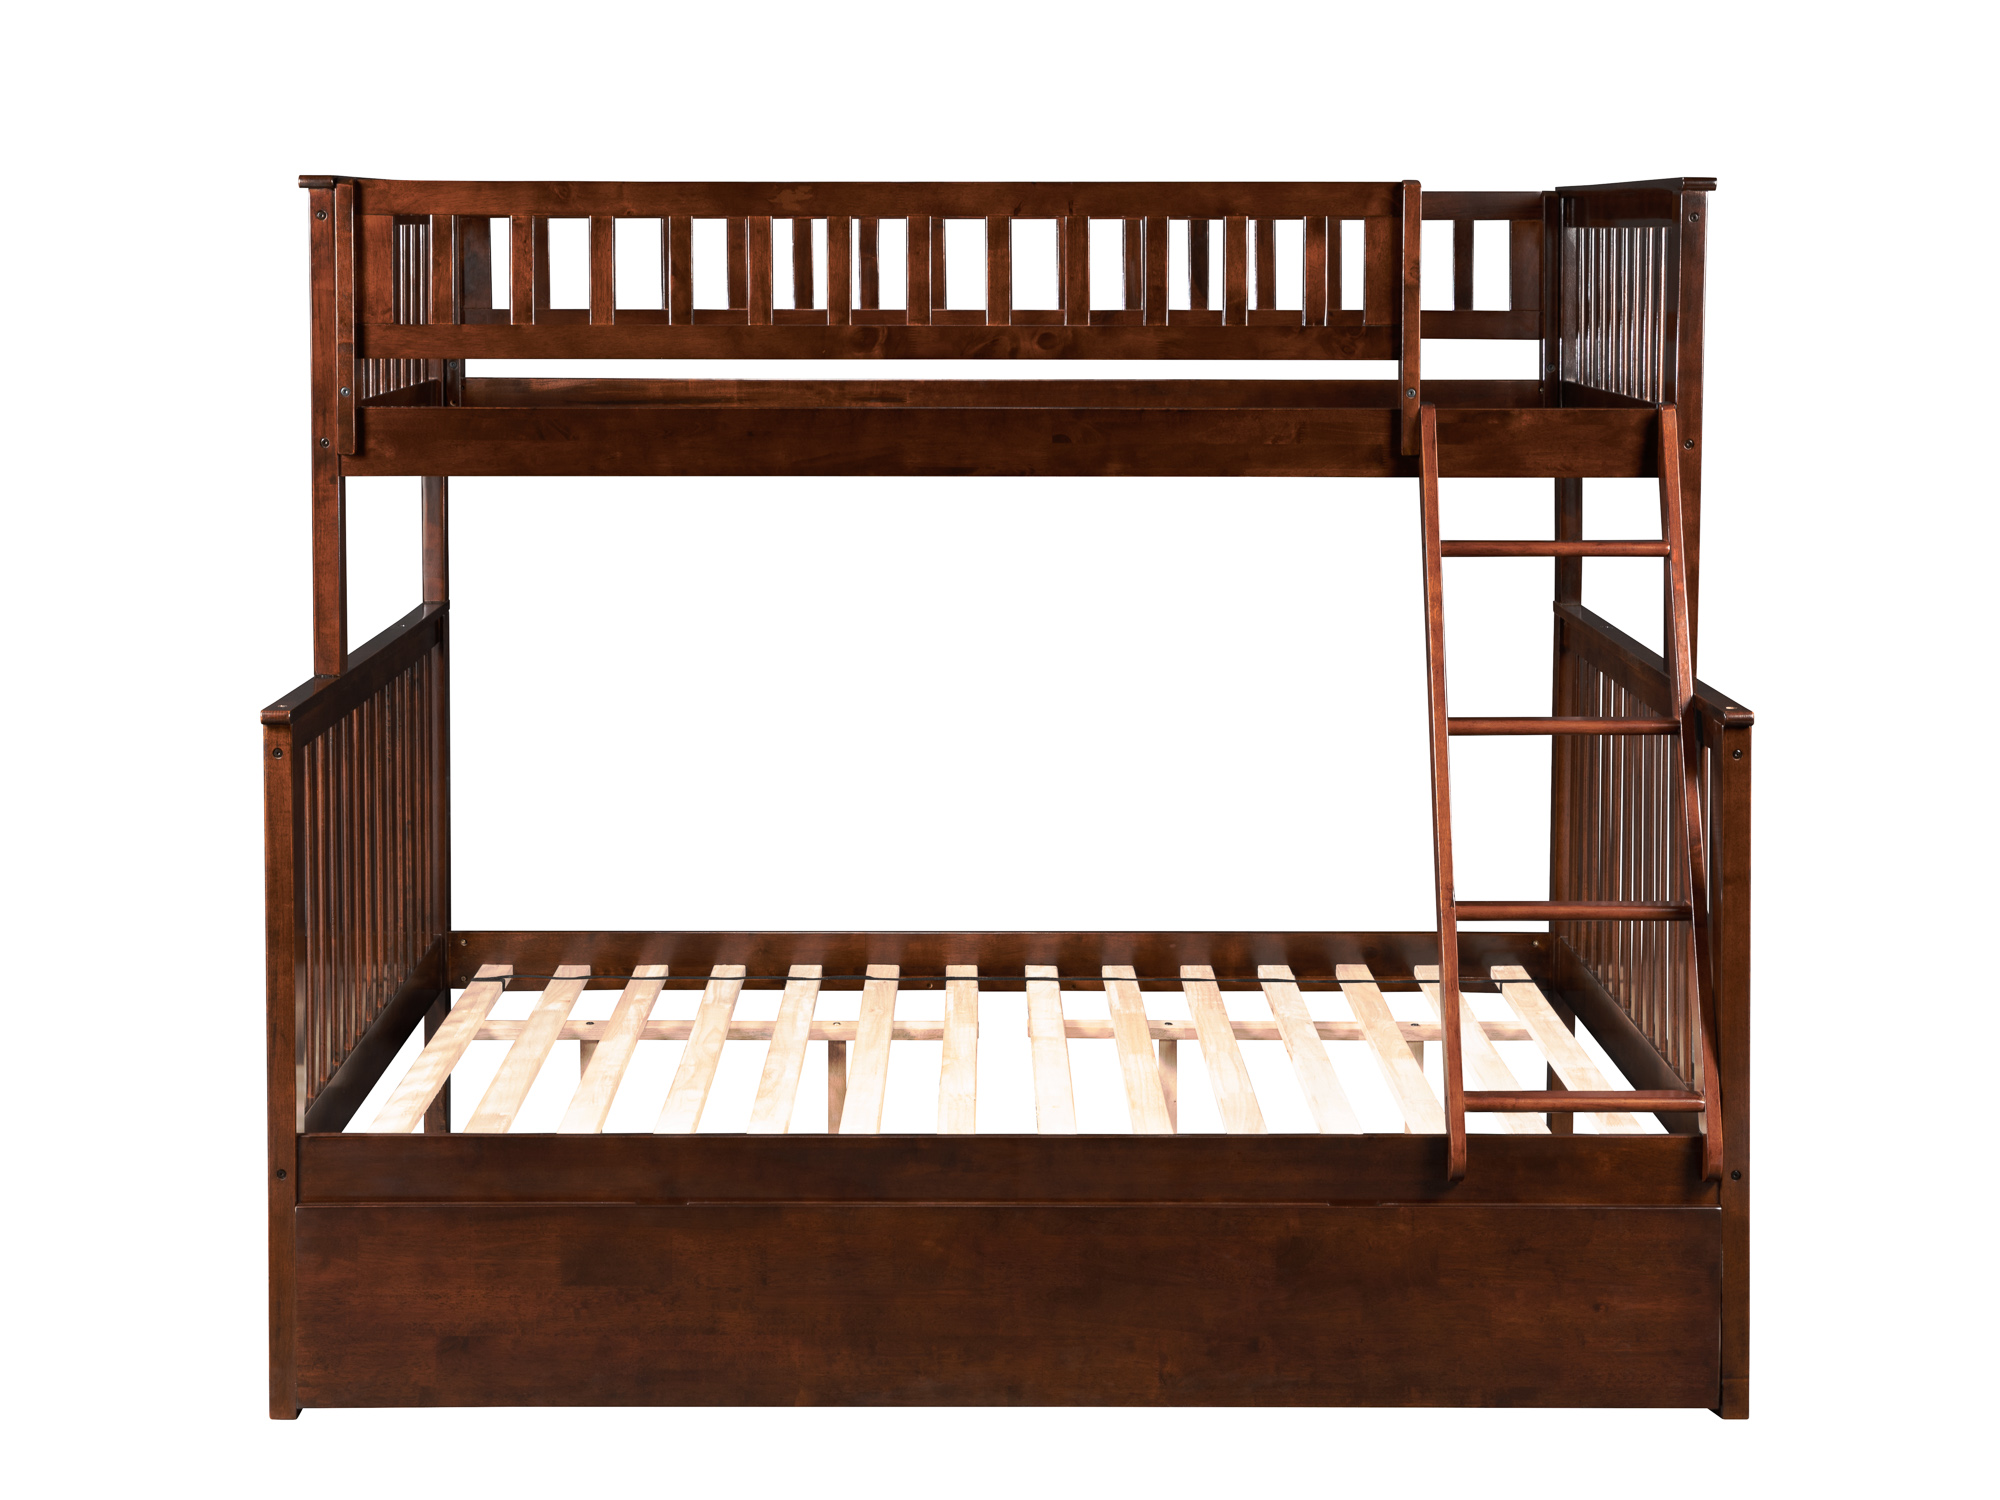 Woodland Bunk Bed Twin over Full with Full Size Urban Trundle Bed in Walnut - image 3 of 7